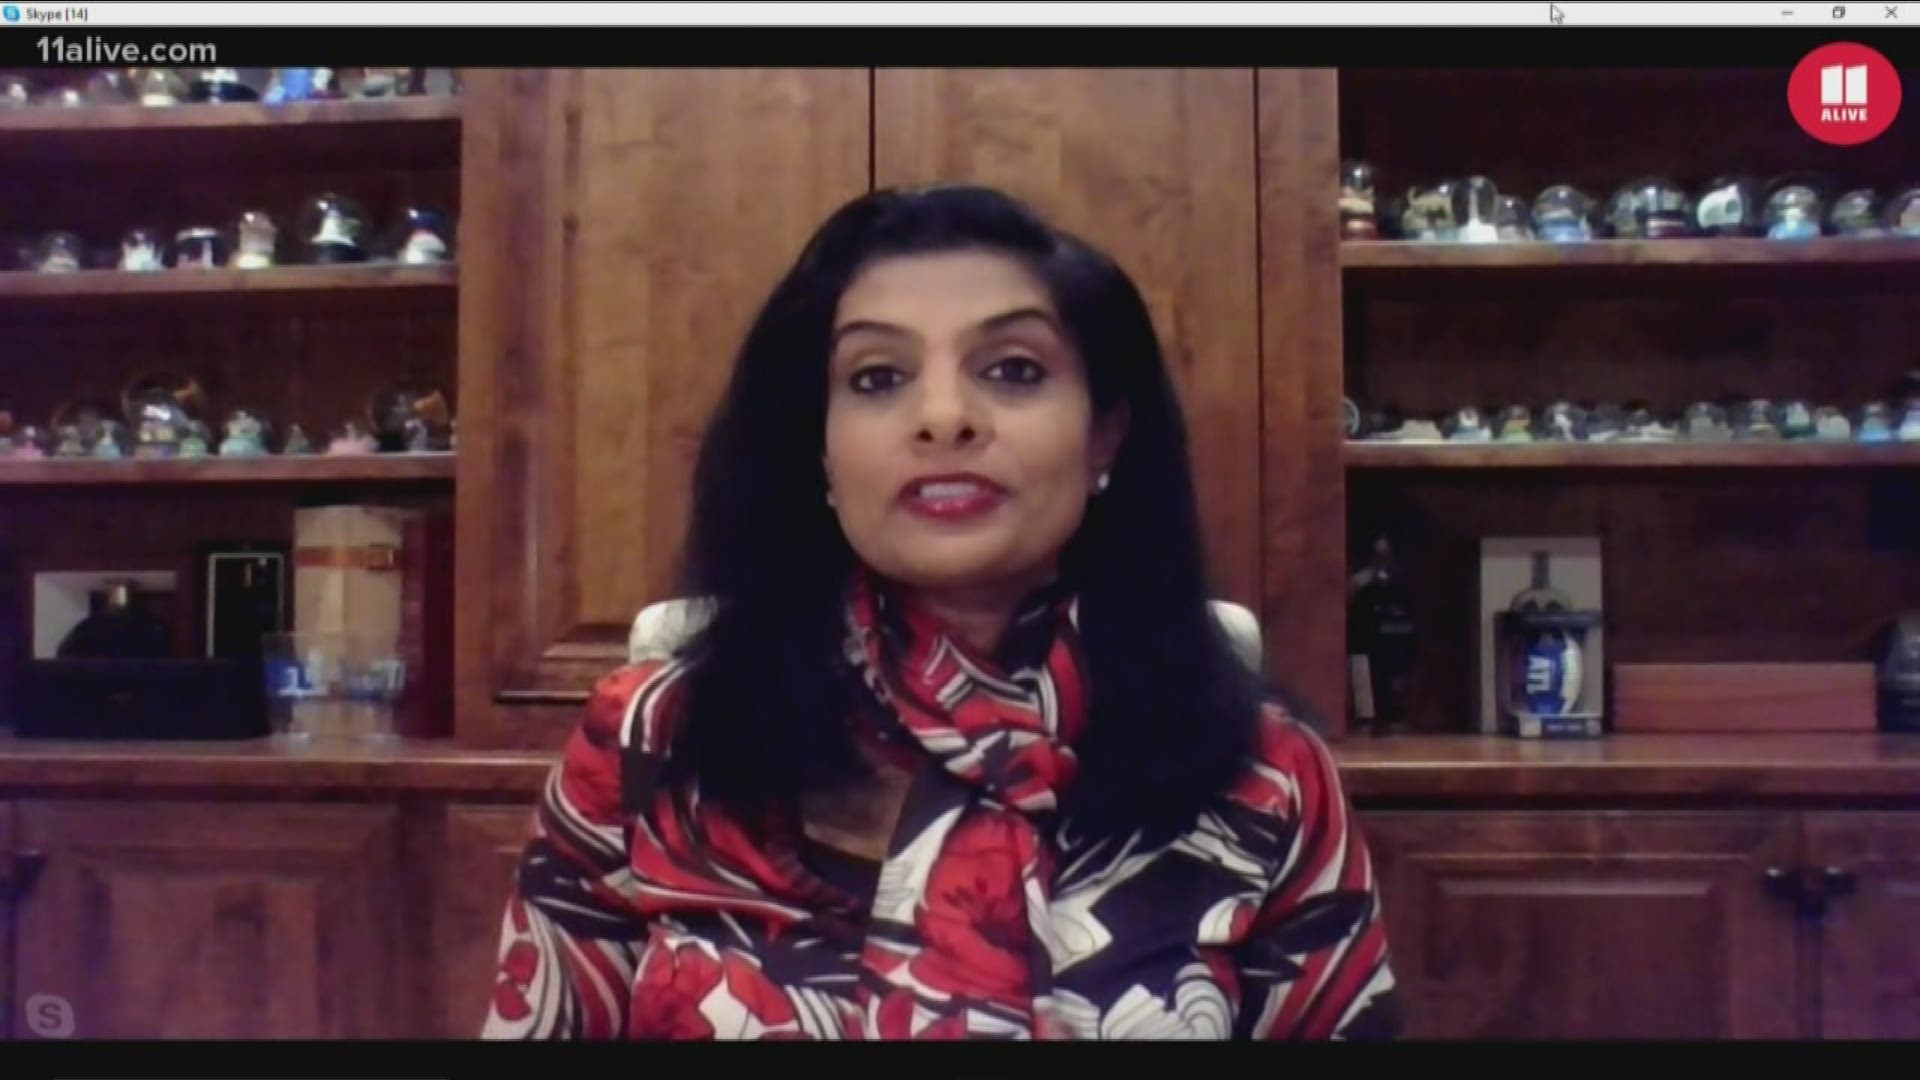 11Alive medical correspondent Dr. Sujatha Reddy helps clear up some uncertainty.